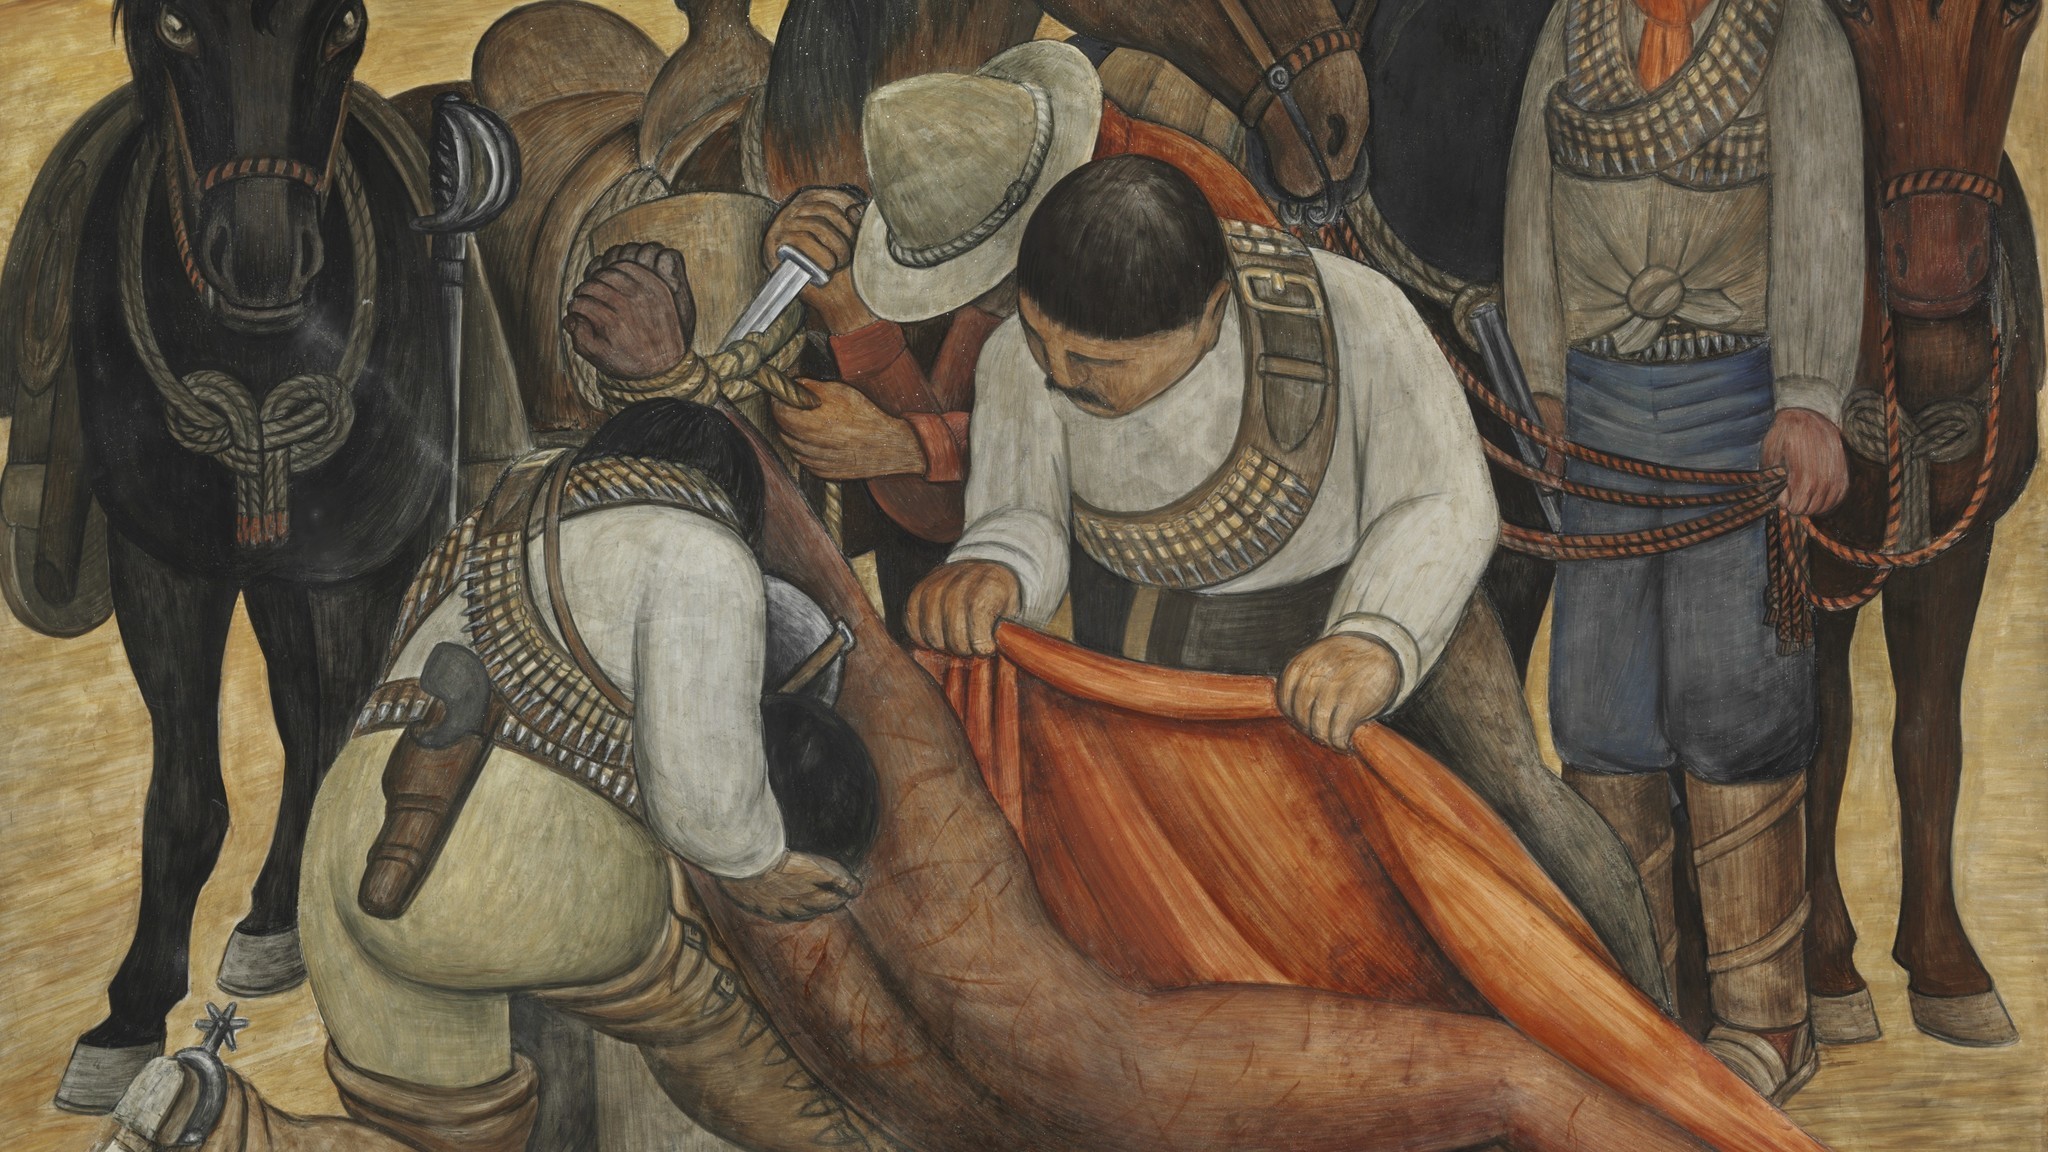 2048x1152 Diego Rivera, "Liberation of the Peon (detail)," 1931, a